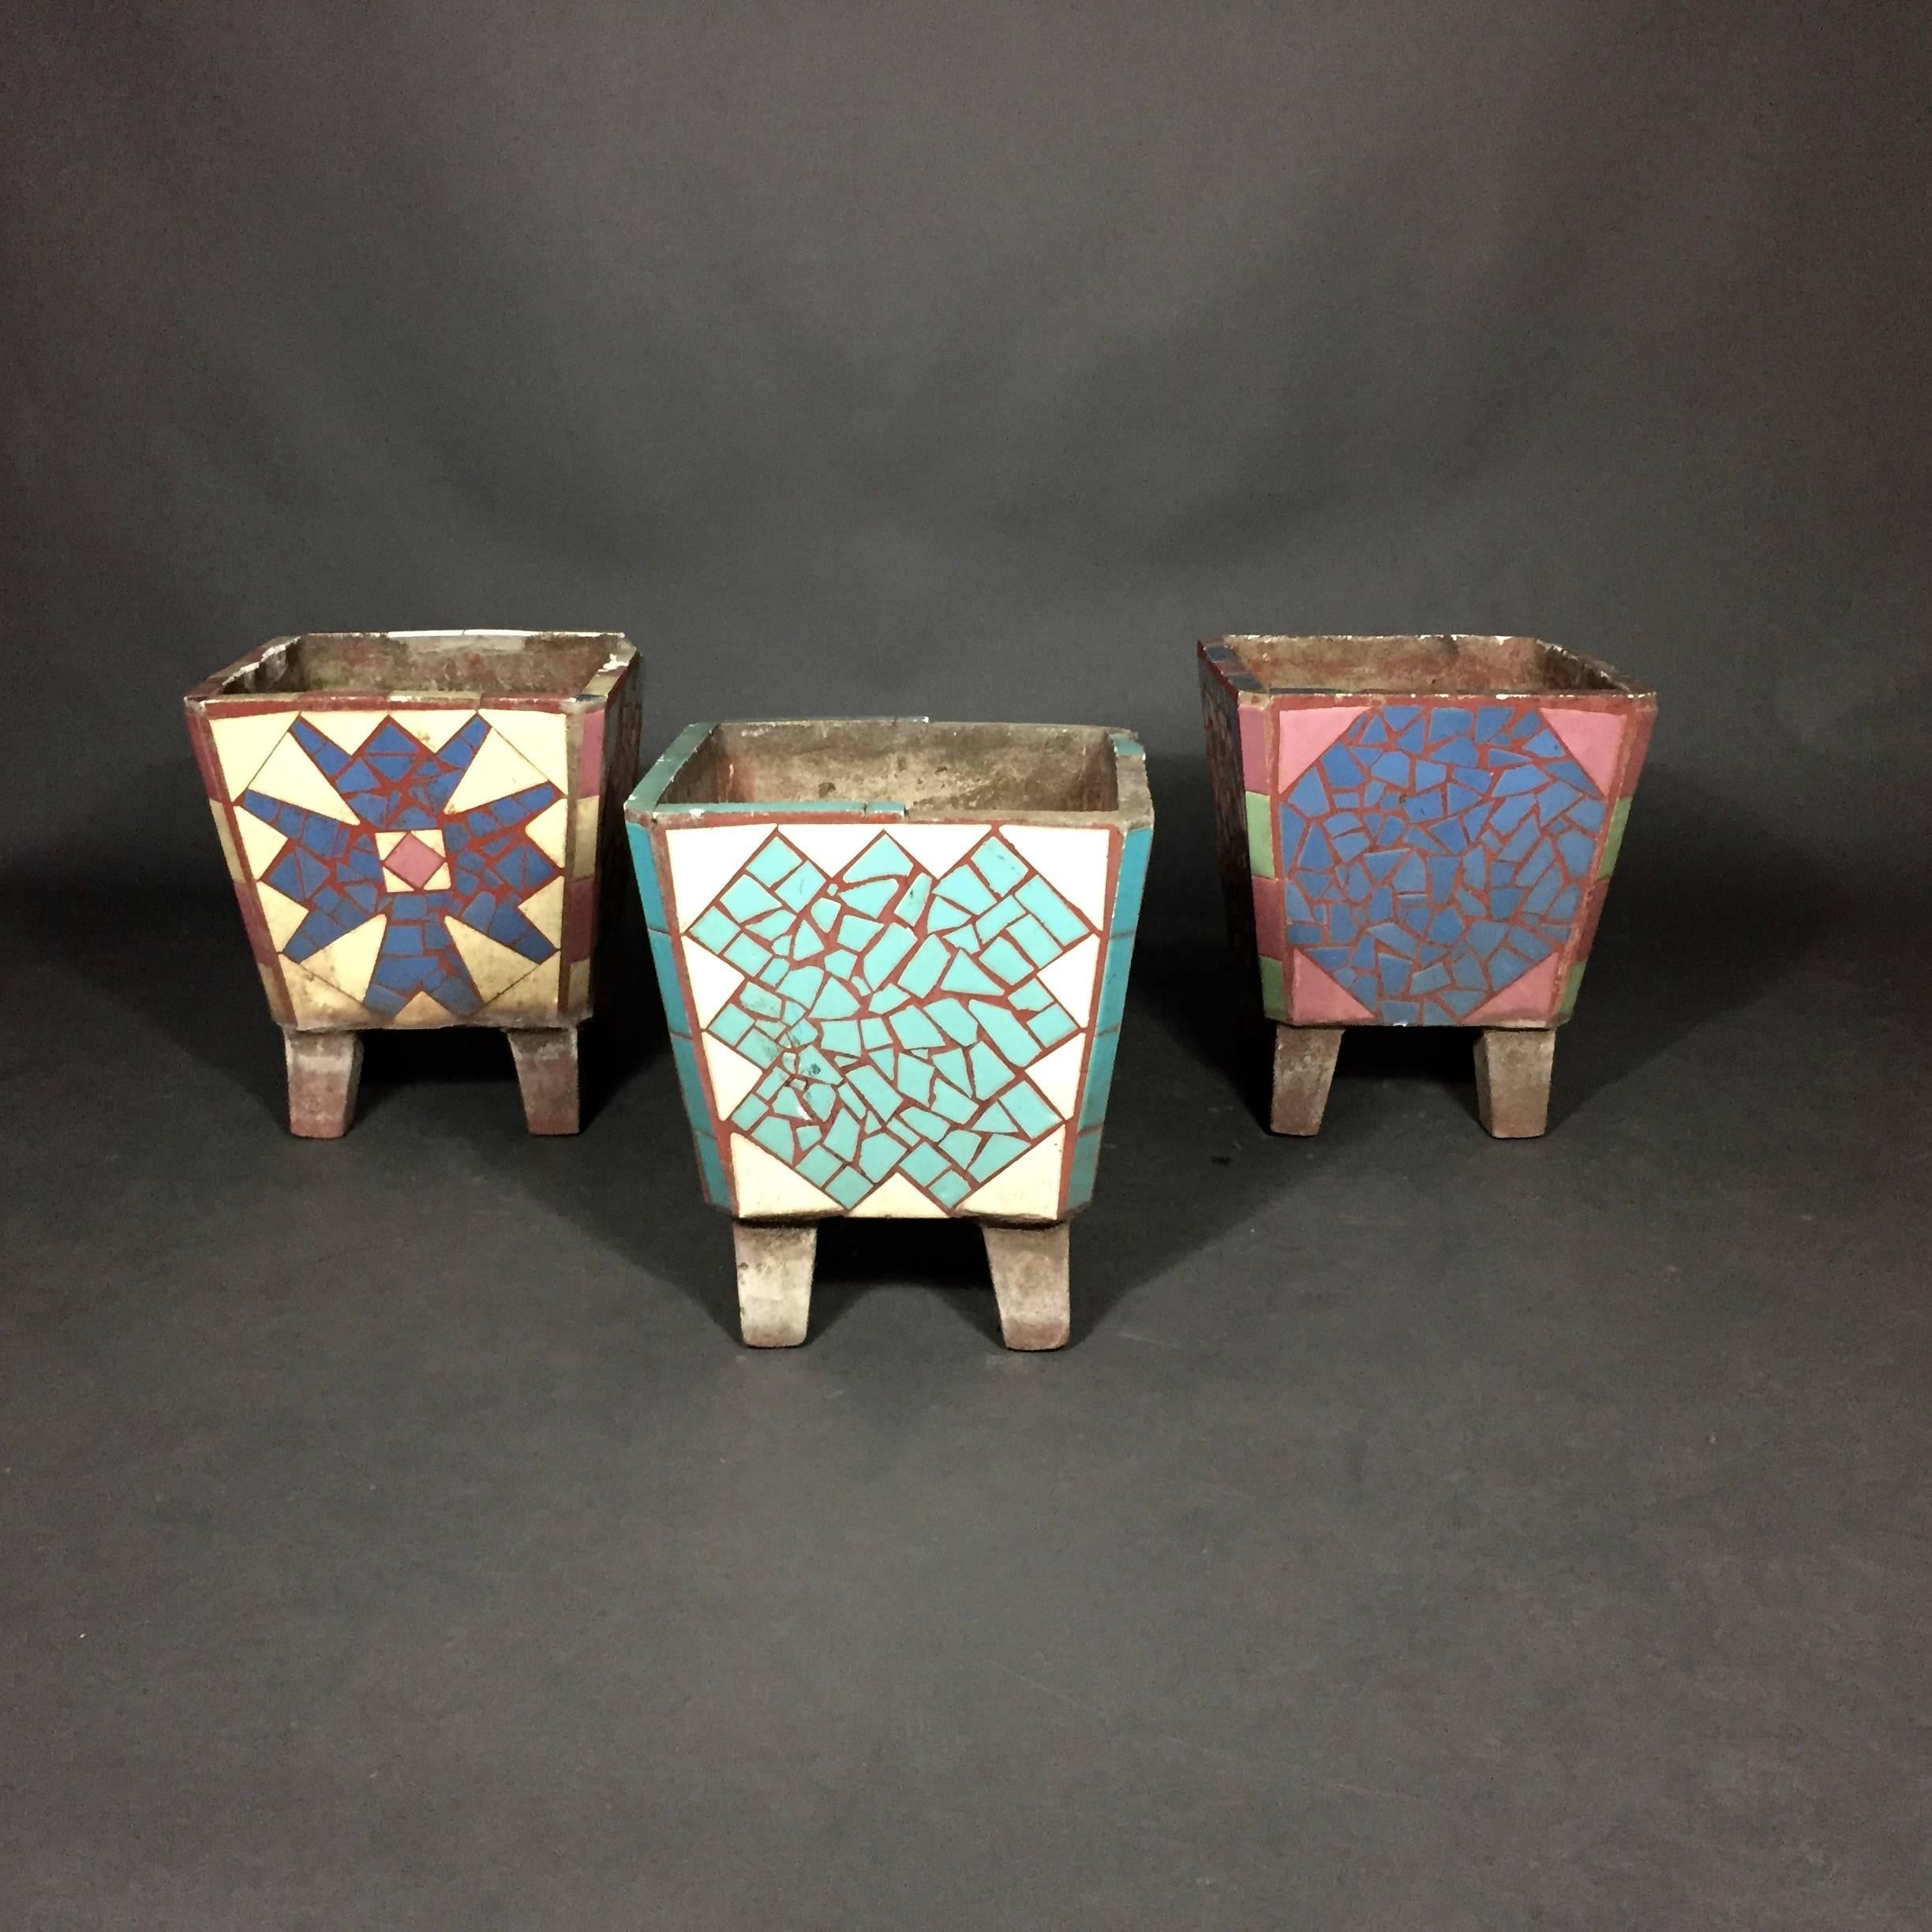 A wonderfully unusual set of garden planters in cast stone, colorful ceramic tile decorated with different designs on each of four planter sides. Supported by four slightly tilted legs. Likely American, 1950s. Some tiles missing at rim - one planter